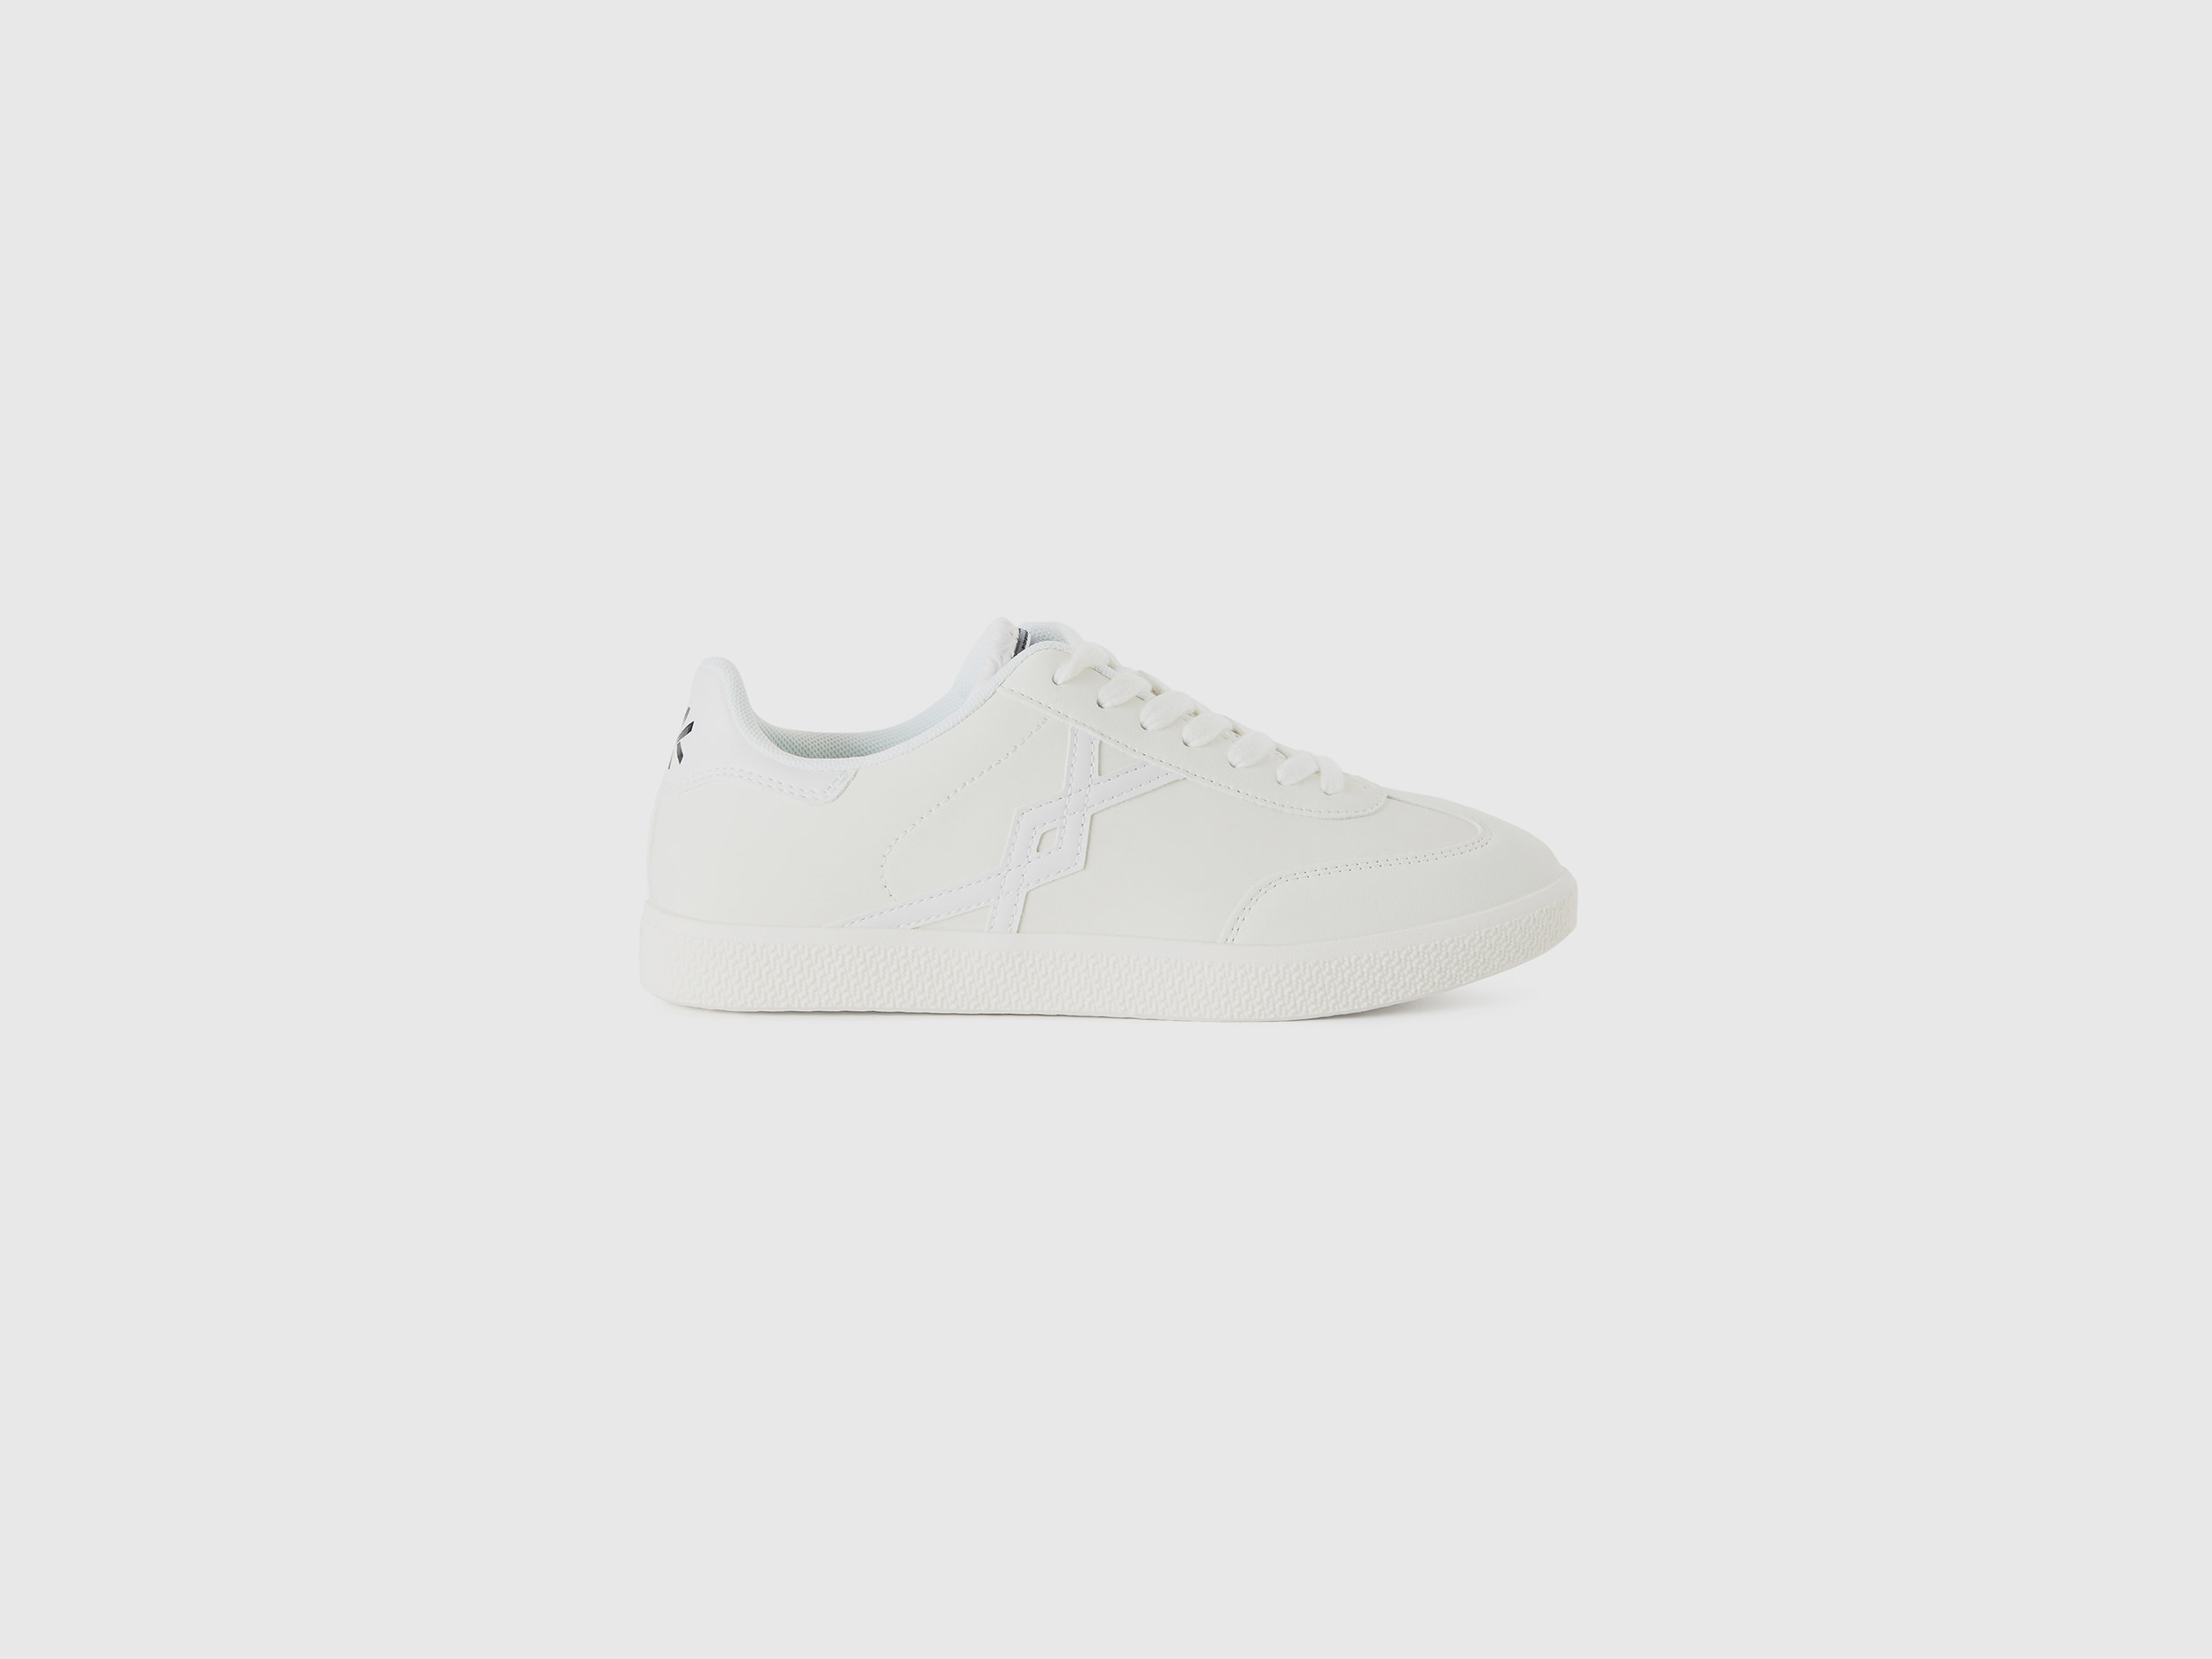 Benetton, Low-top Sneakers In Imitation Leather, size 4, Creamy White, Women